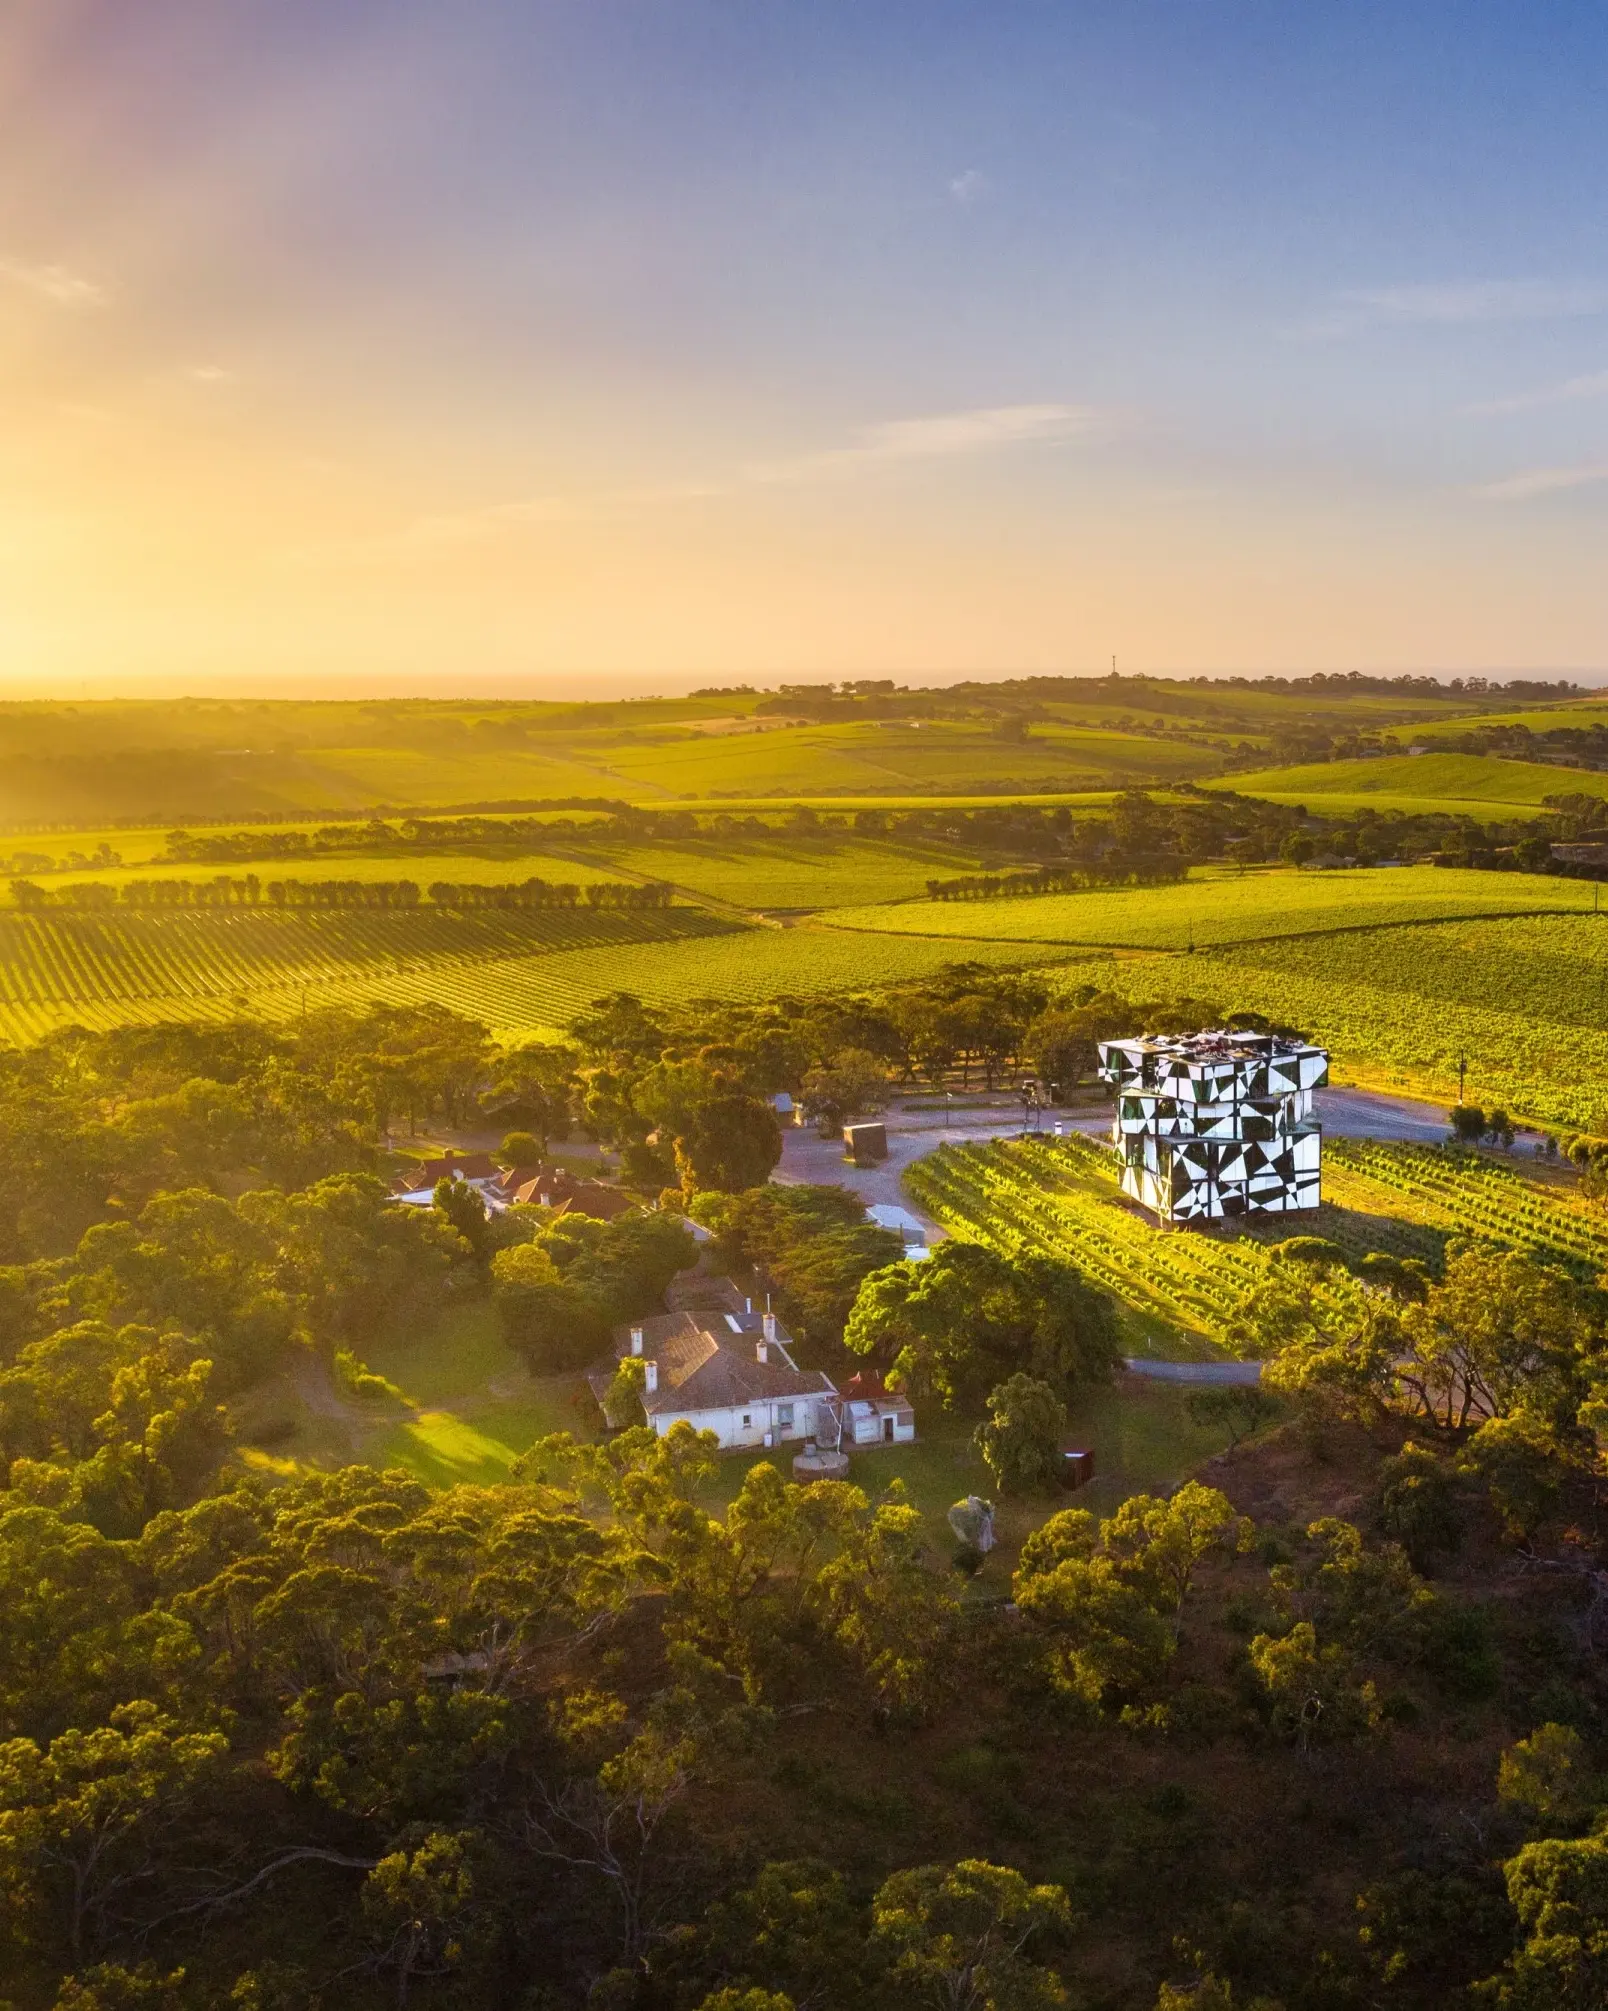 Aerial view of d'Arenberg Cube surrounded by vineyards at d'Arenberg winery, McLaren Vale. Image credit: South Australia Tourism Commission